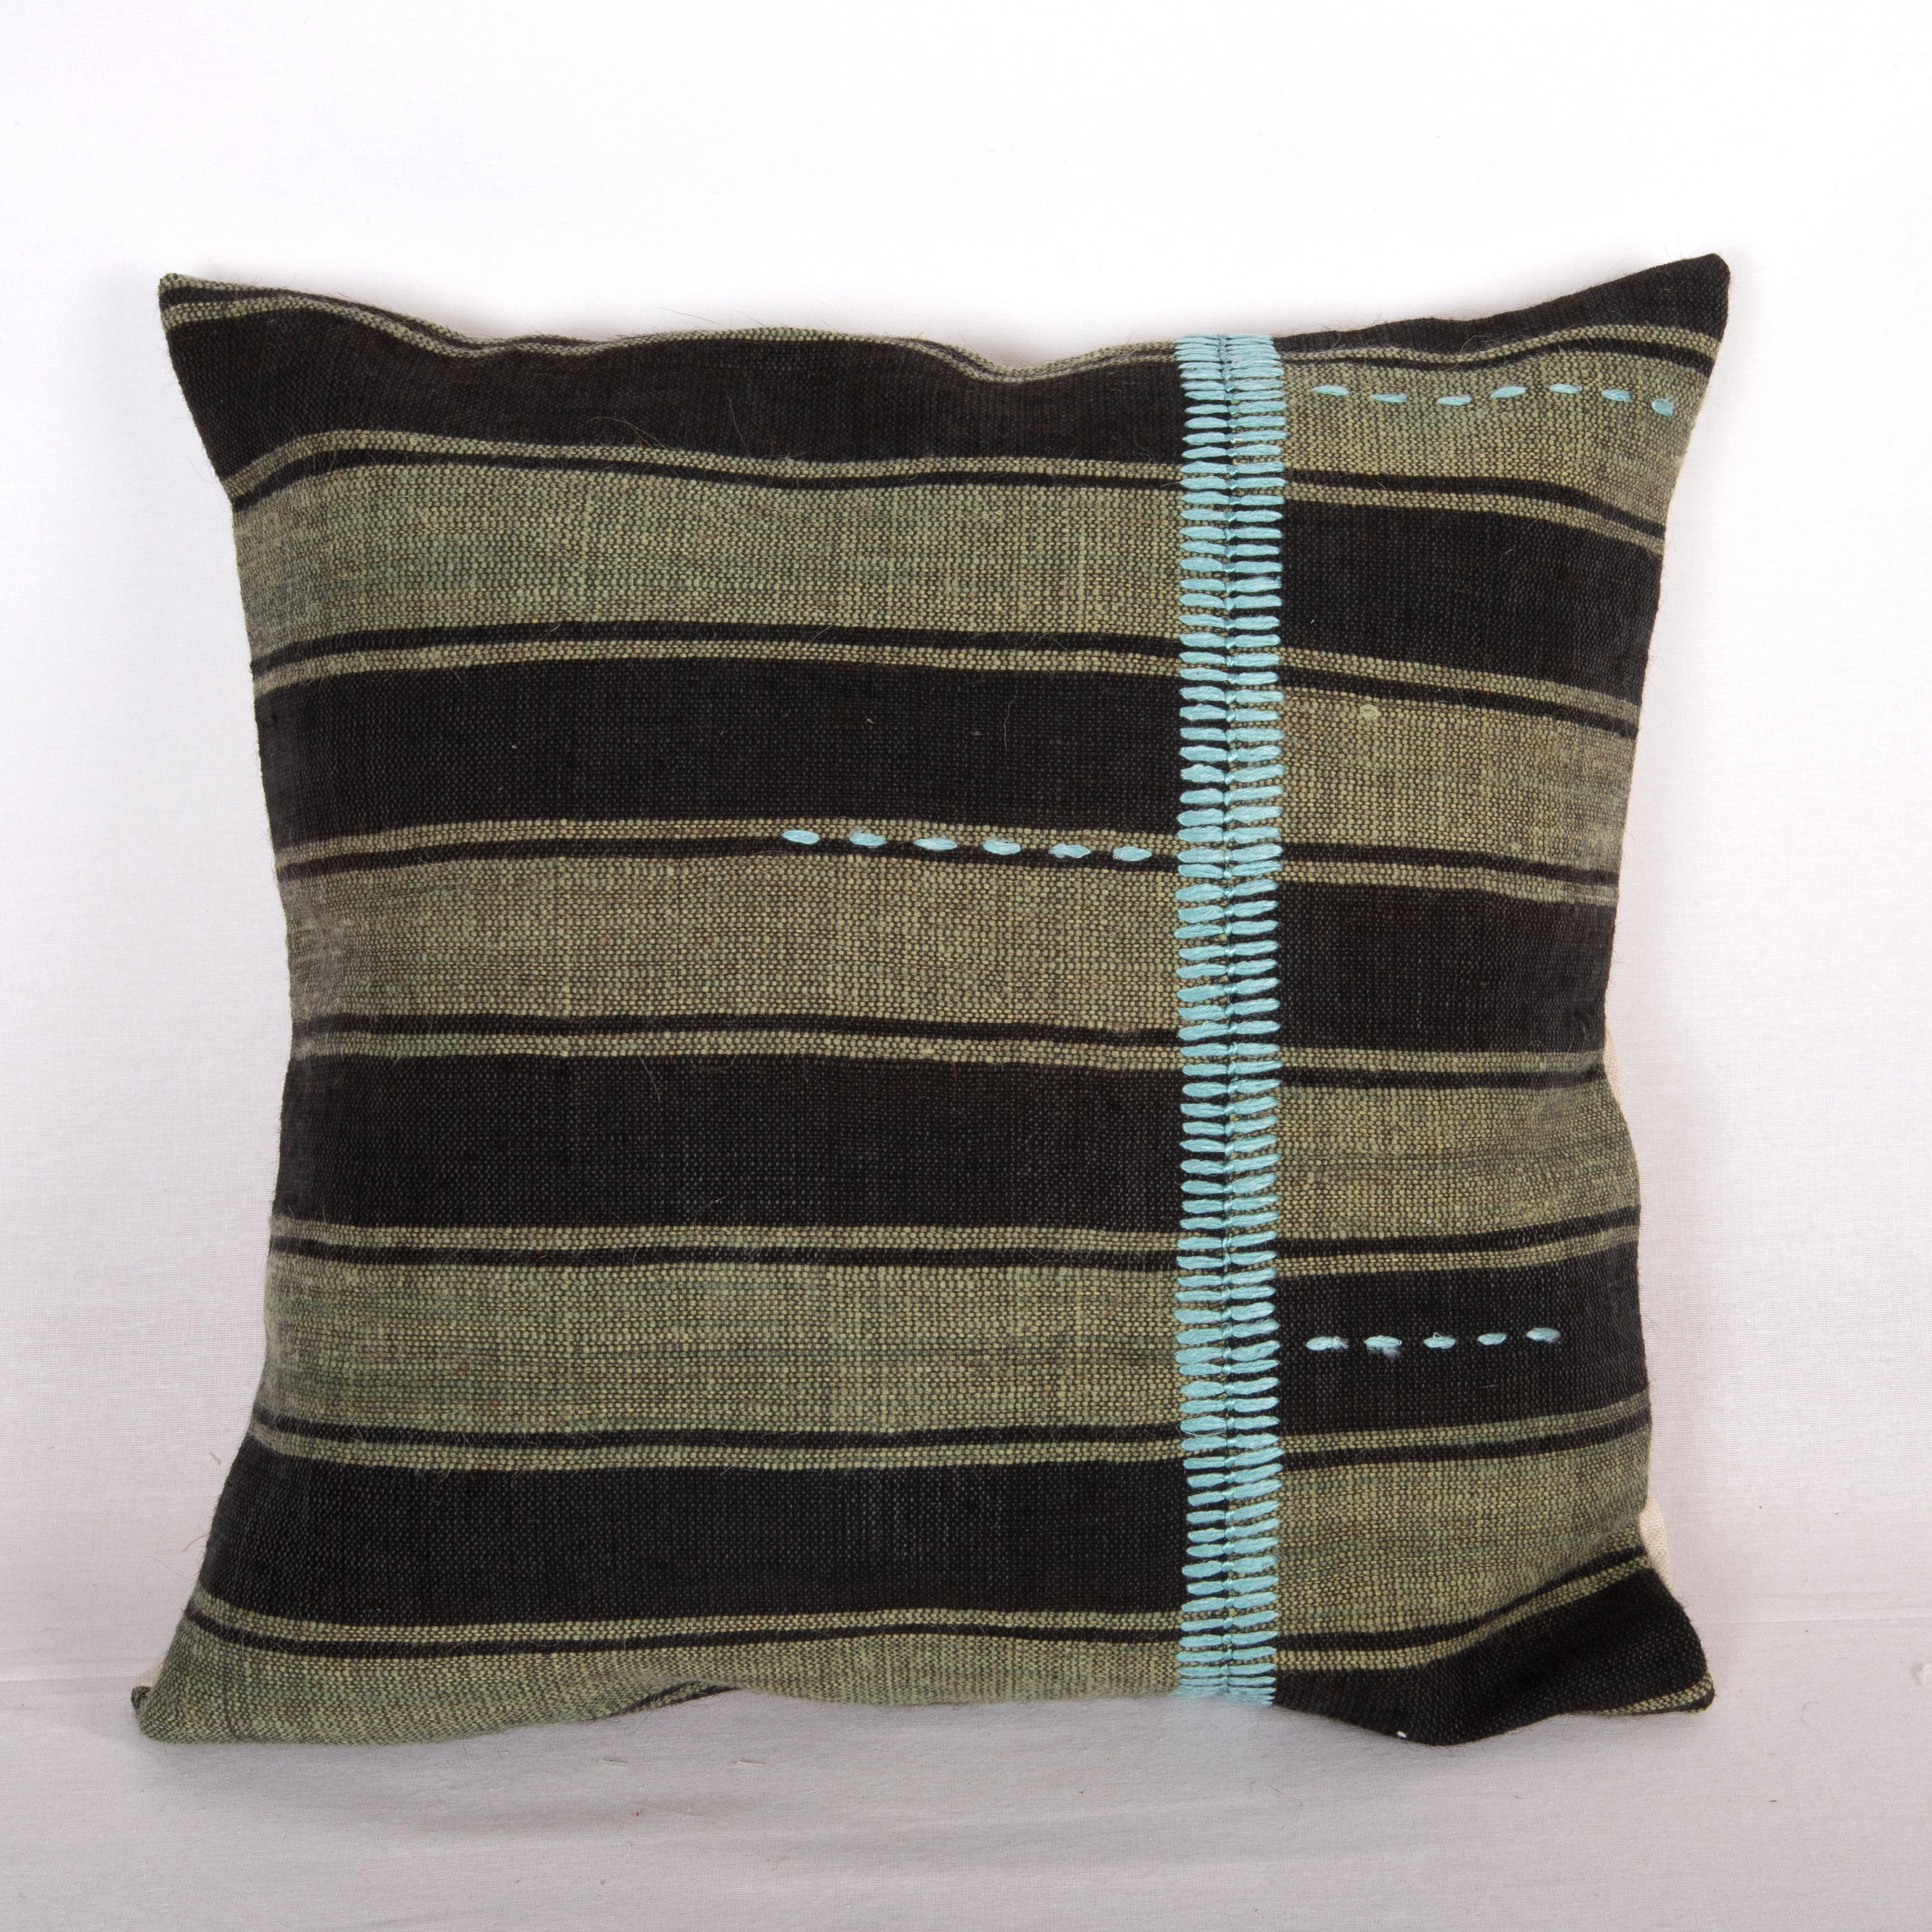 Hand-Woven Pillow Case Made from an Anatolian Cover, Mid 20th C